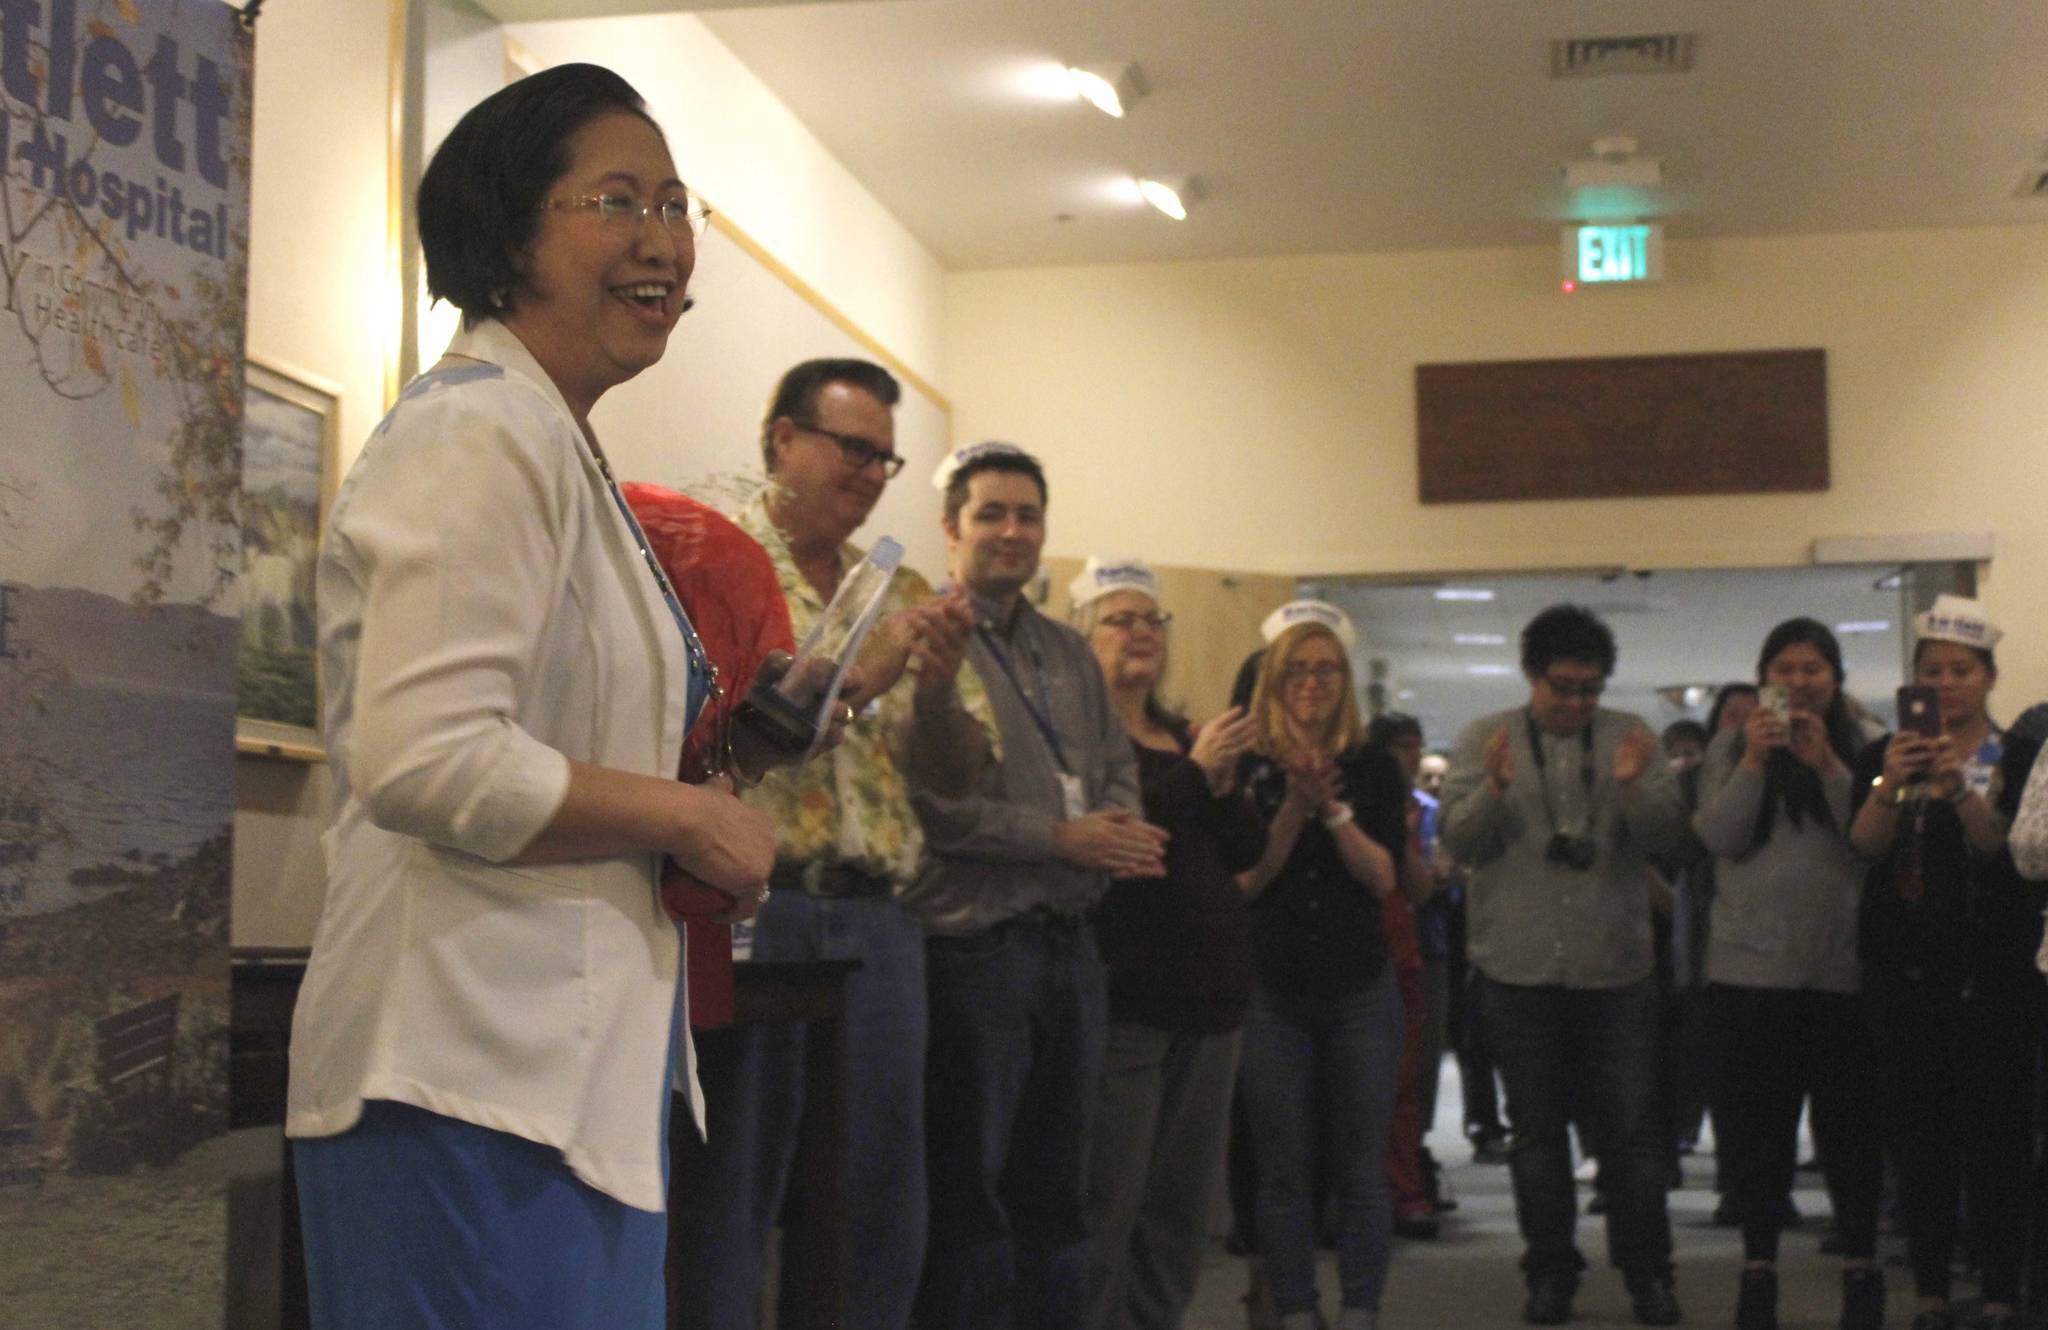 Salud Elizarde, the recipient of the 2017 Excellence in Nursing Award from Bartlett Regional Hospital, laughs as she concludes her acceptance speech Friday. Elizarde has spent 15 years at the hospital and has been instrumental in the Medical-Surgical Unit. (Alex McCarthy | Juneau Empire)